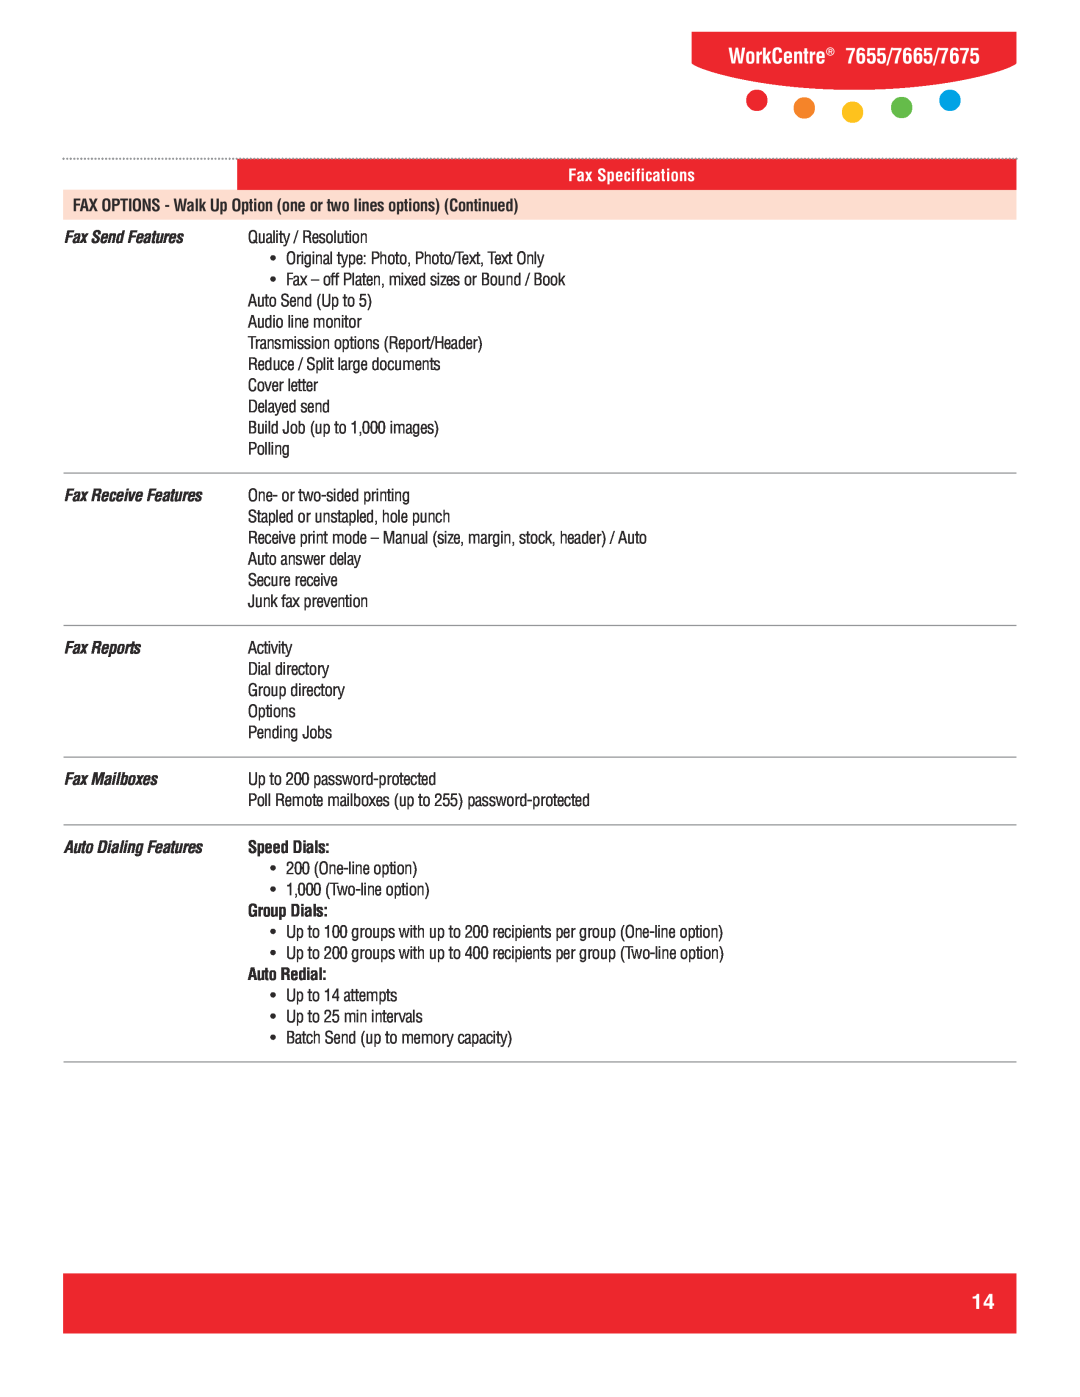 Xerox specifications Speed Dials, WorkCentre 7655/7665/7675, Fax Specifications 